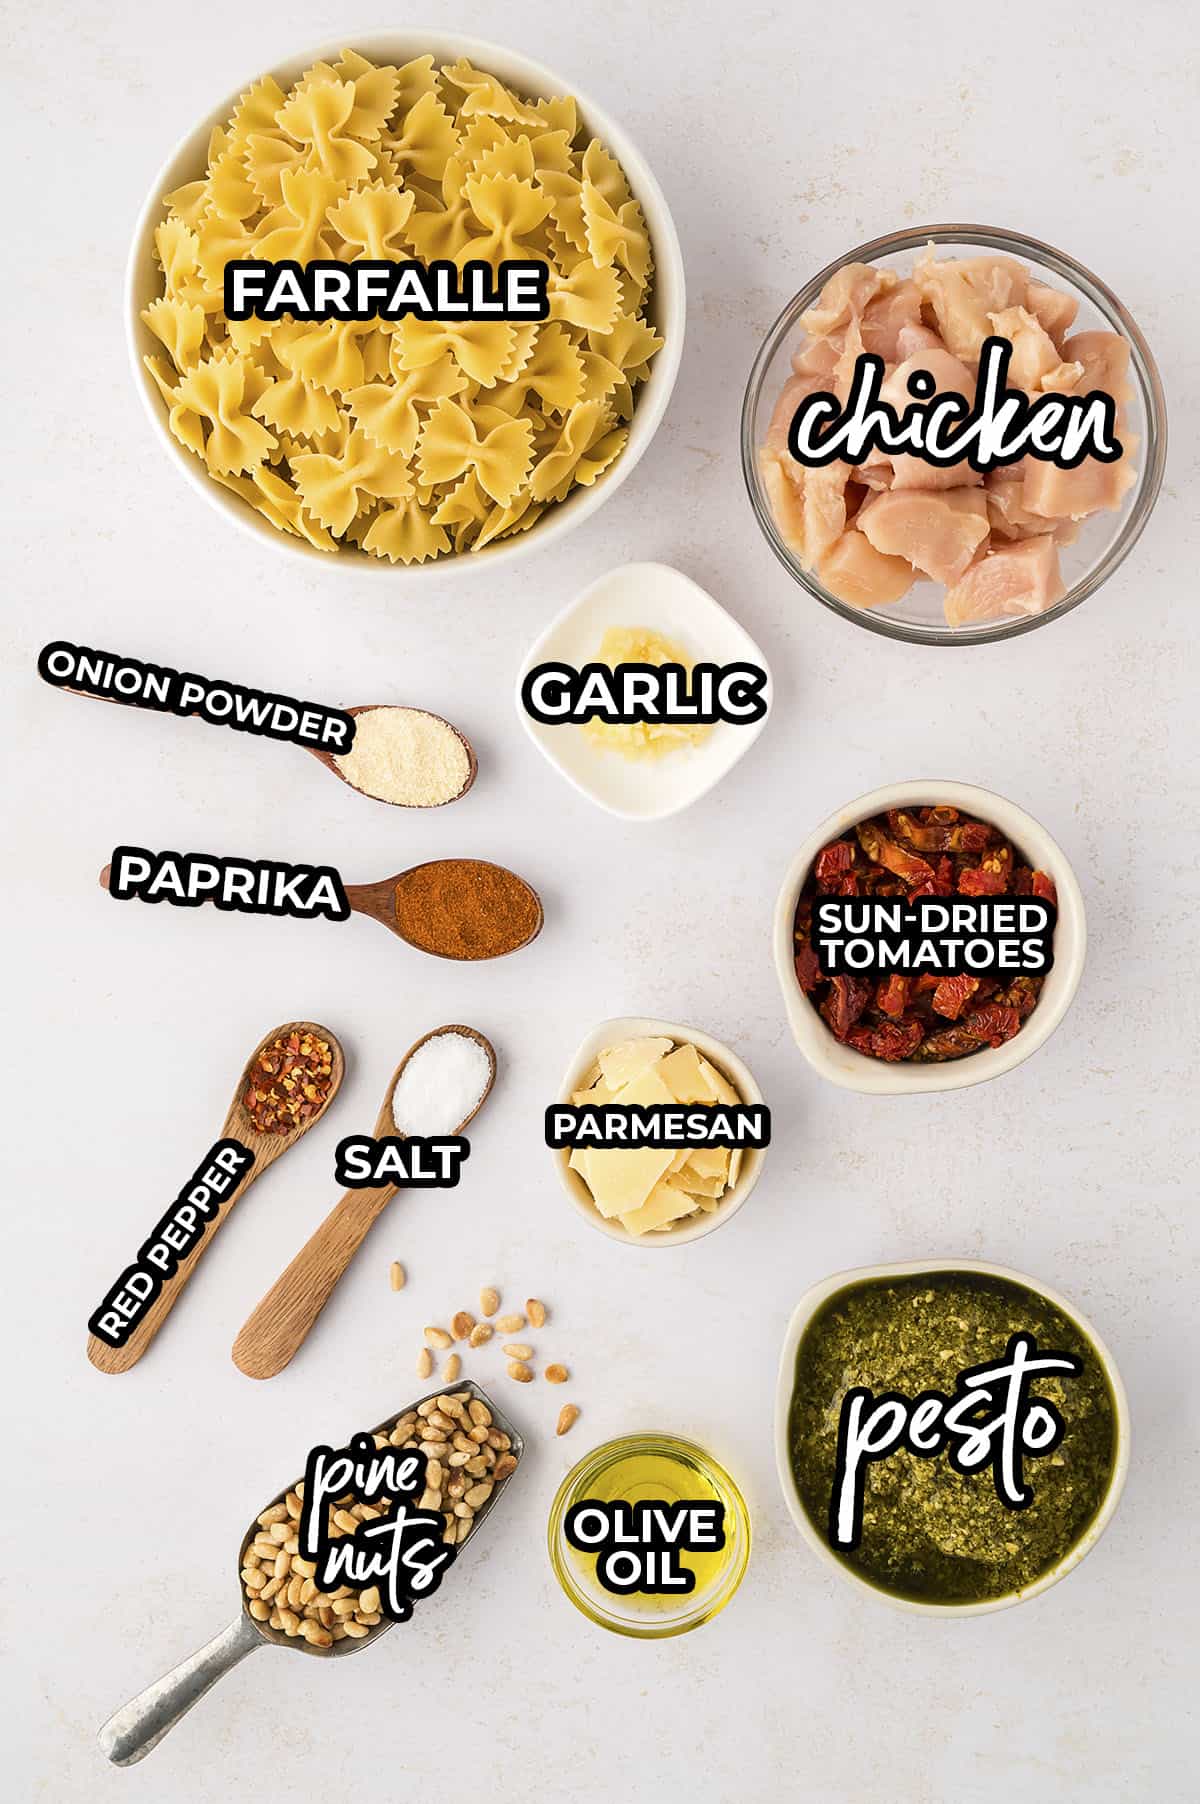 Ingredients for chicken pesto pasta in small dishes on counter.